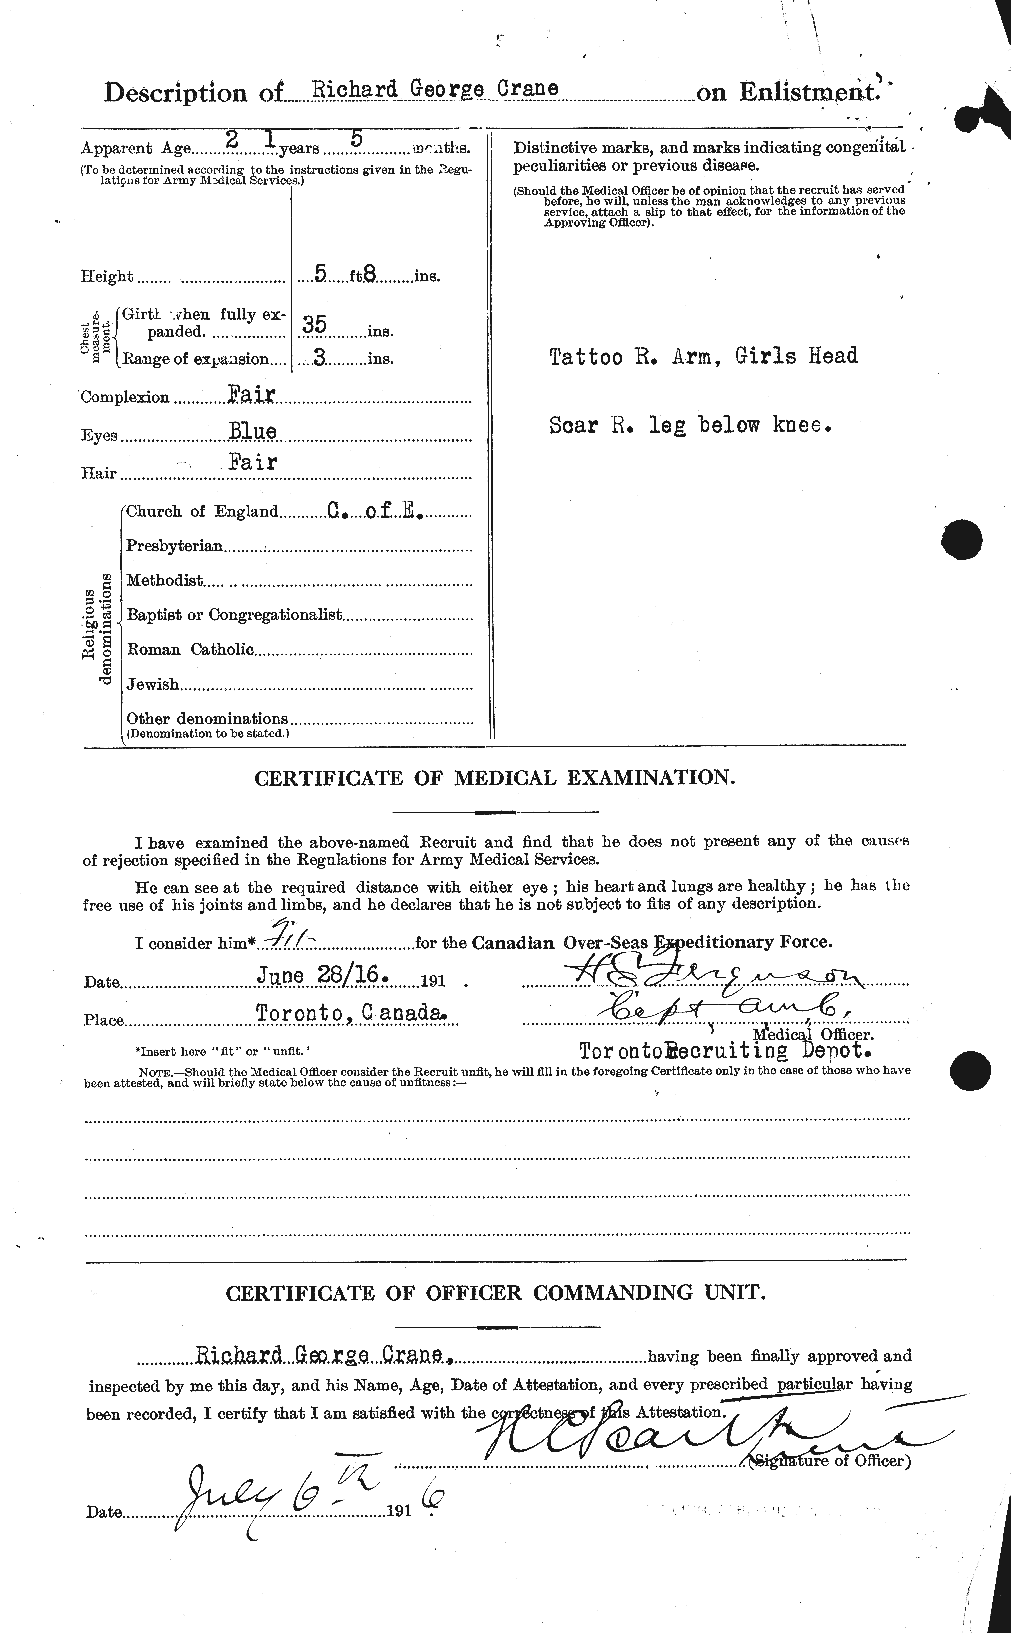 Personnel Records of the First World War - CEF 061754b